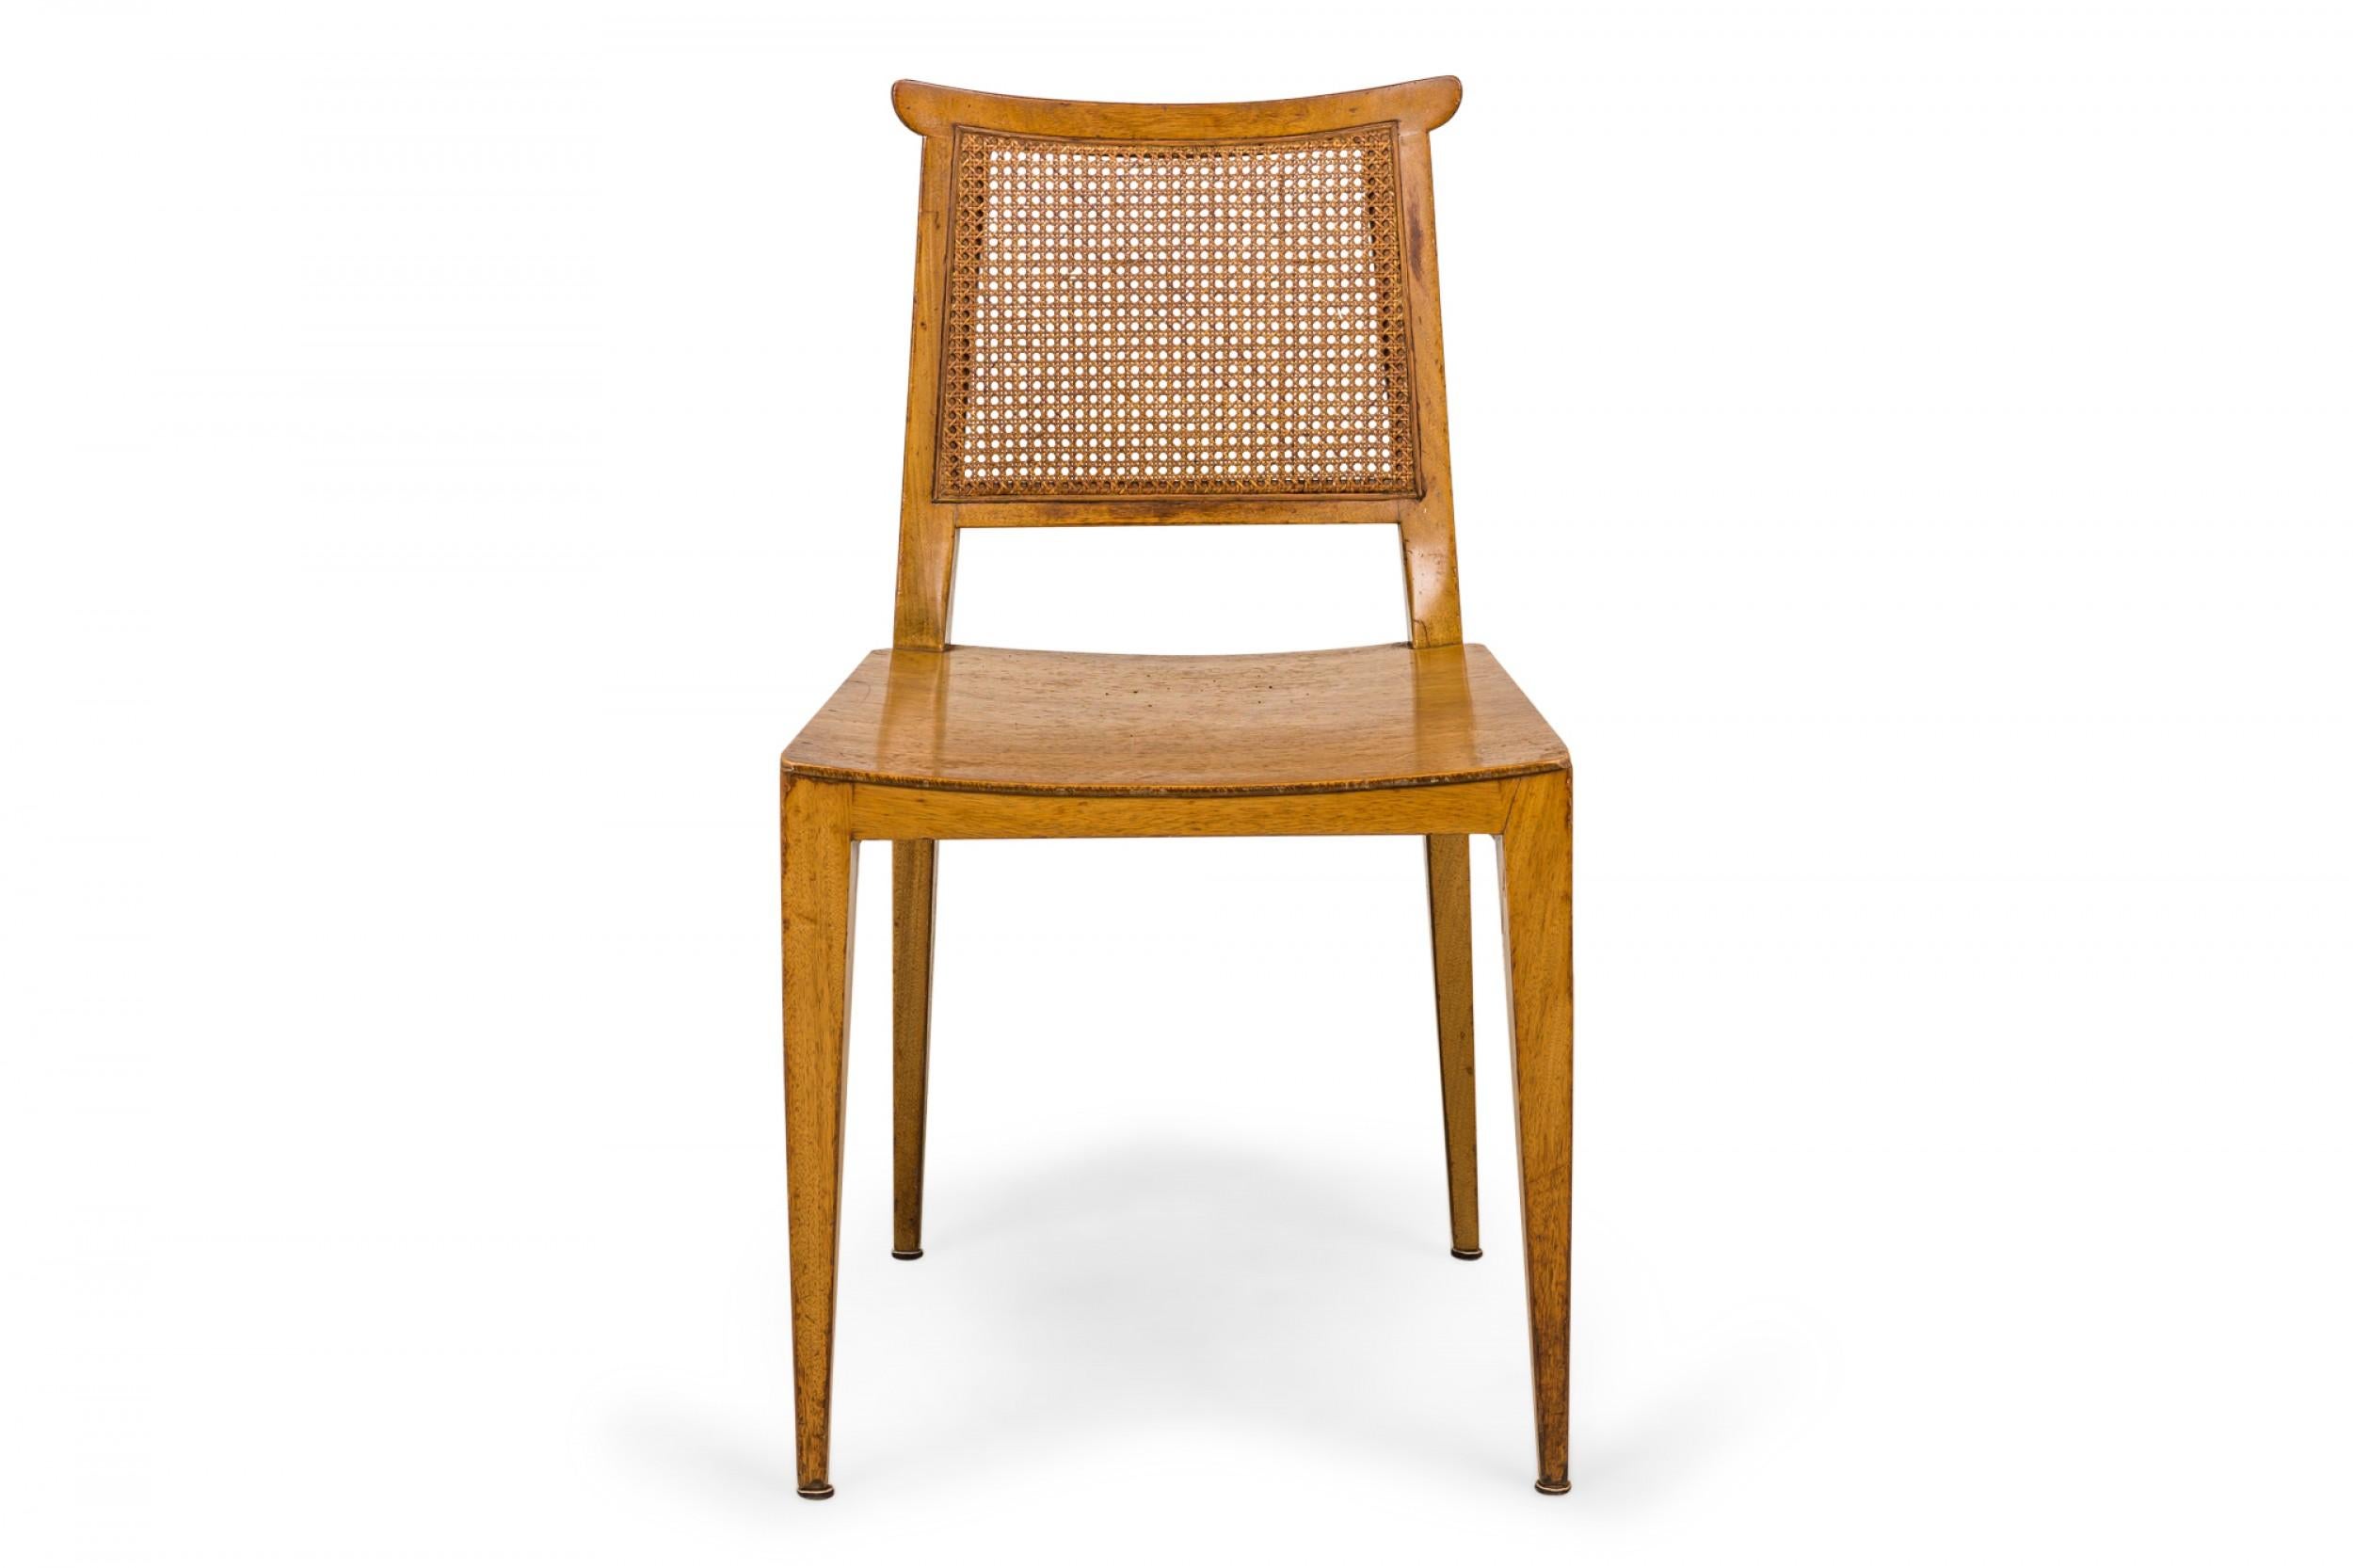 SET of 4 American Mid-Century side chairs with light wooden frames, solid wooden seats, and caned backs. (EDWARD WORMLEY FOR DUNBAR FURNITURE COMPANY)(PRICED AS SET)
